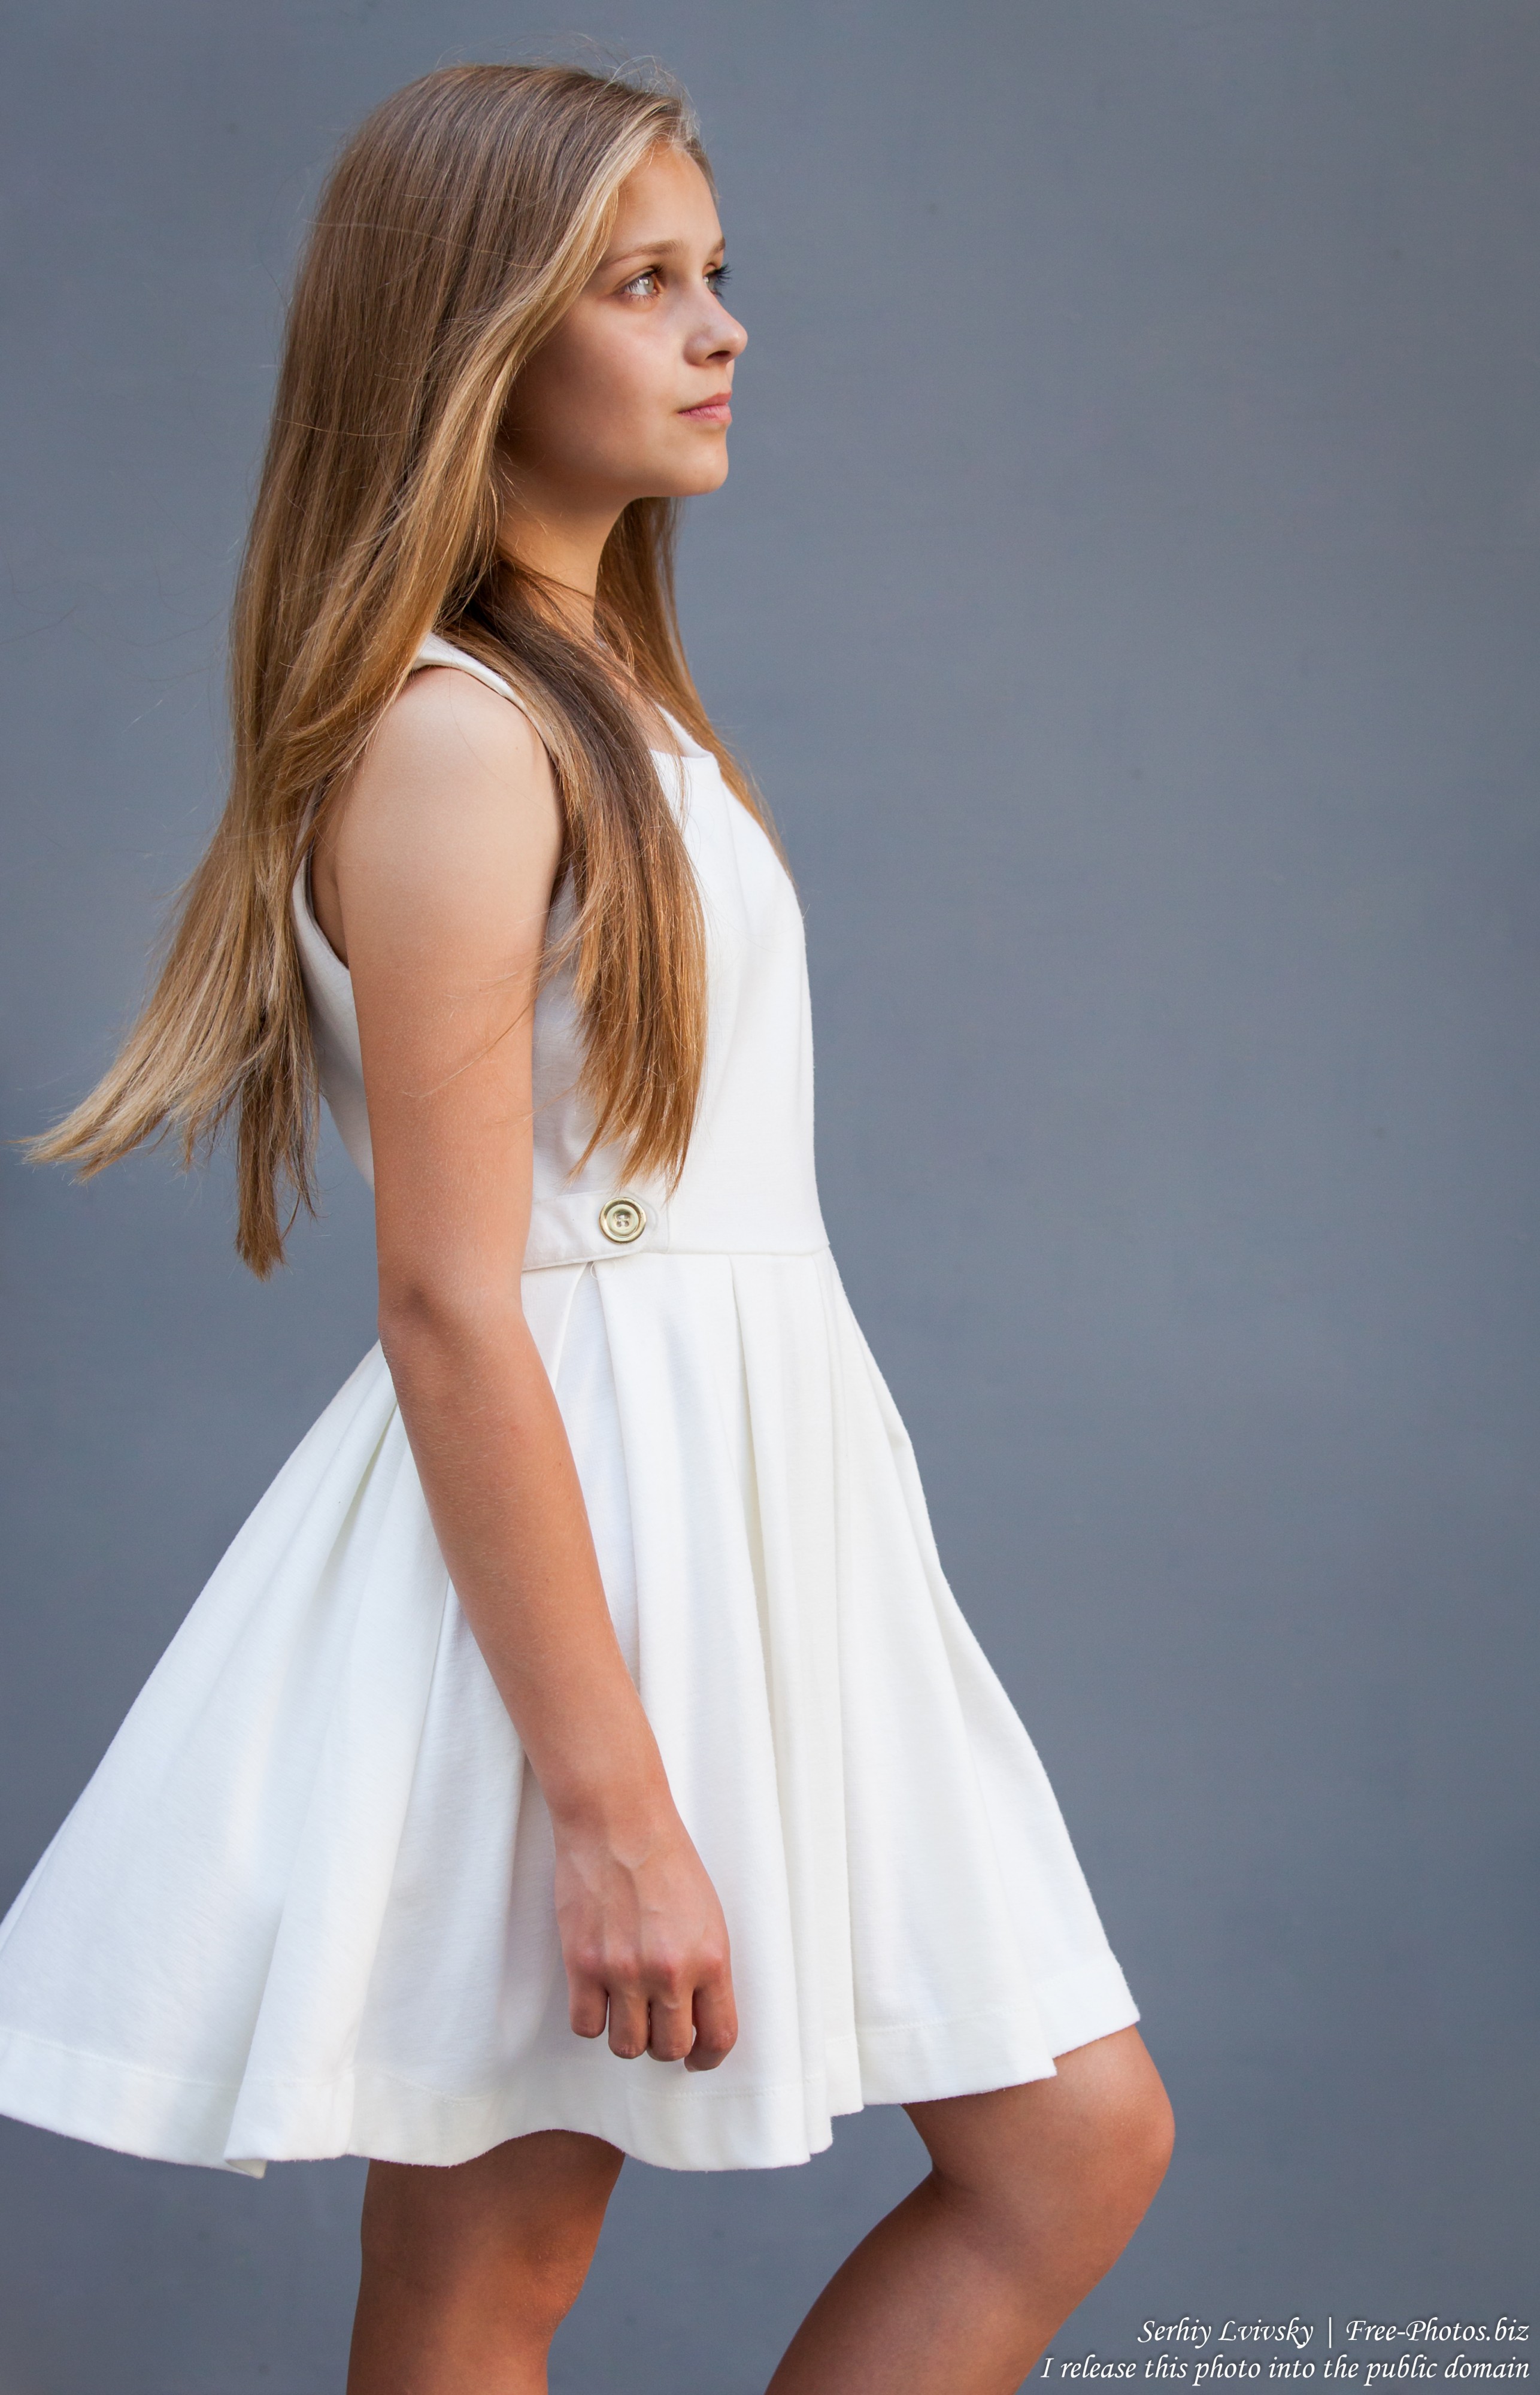 a 12-year-old blond girl wearing a white dress photographed in July 2015 by Serhiy Lvivsky, picture 12